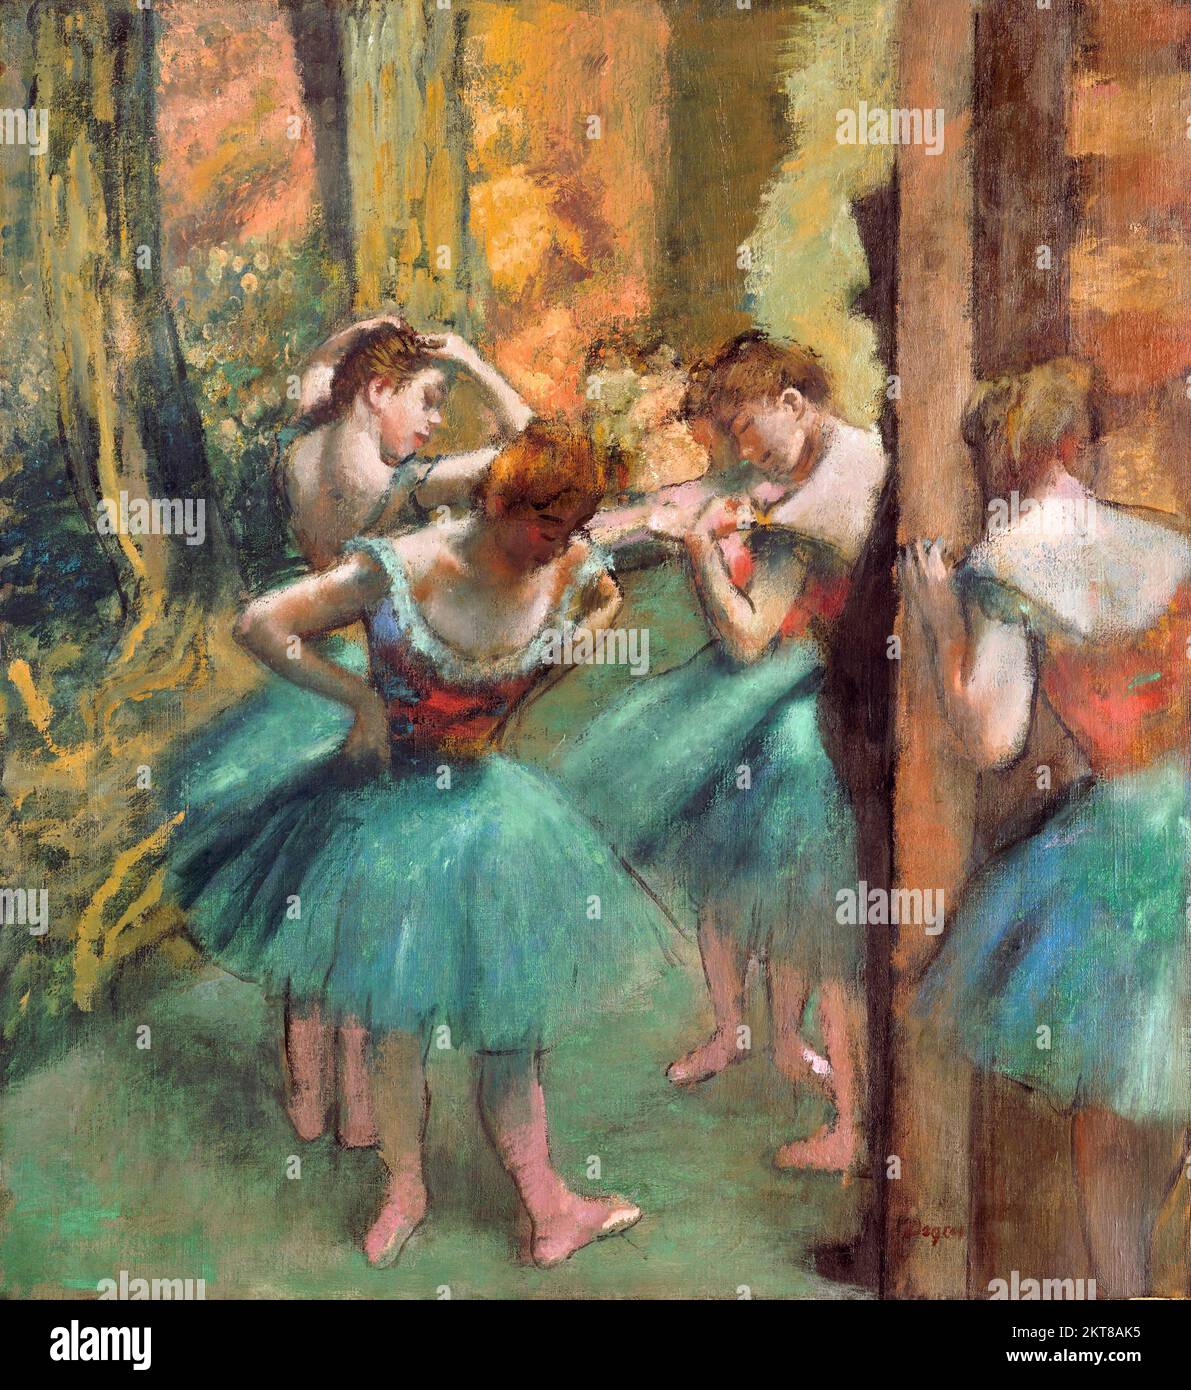 Degas. Painting entitled 'Dancers, Pink and Green' by Edgar Degas (1834-1917), oil on canvas, c. 1890 Stock Photo